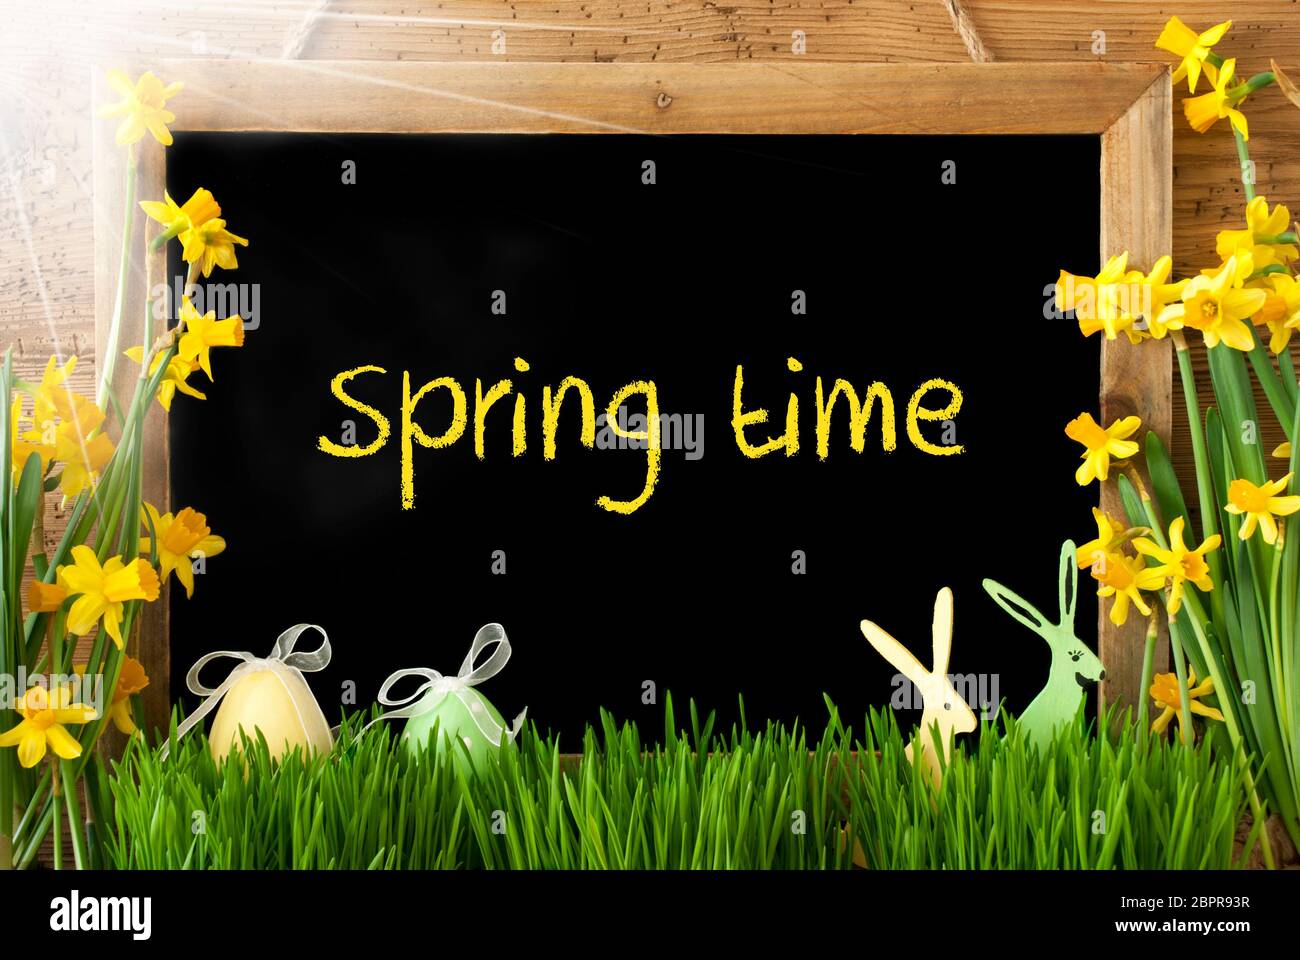 Blackboard With English Text Springtime. Sunny Spring Flowers Nacissus Or Daffodil With Grass, Easter Egg And Bunny. Rustic Aged Wooden Background. Stock Photo